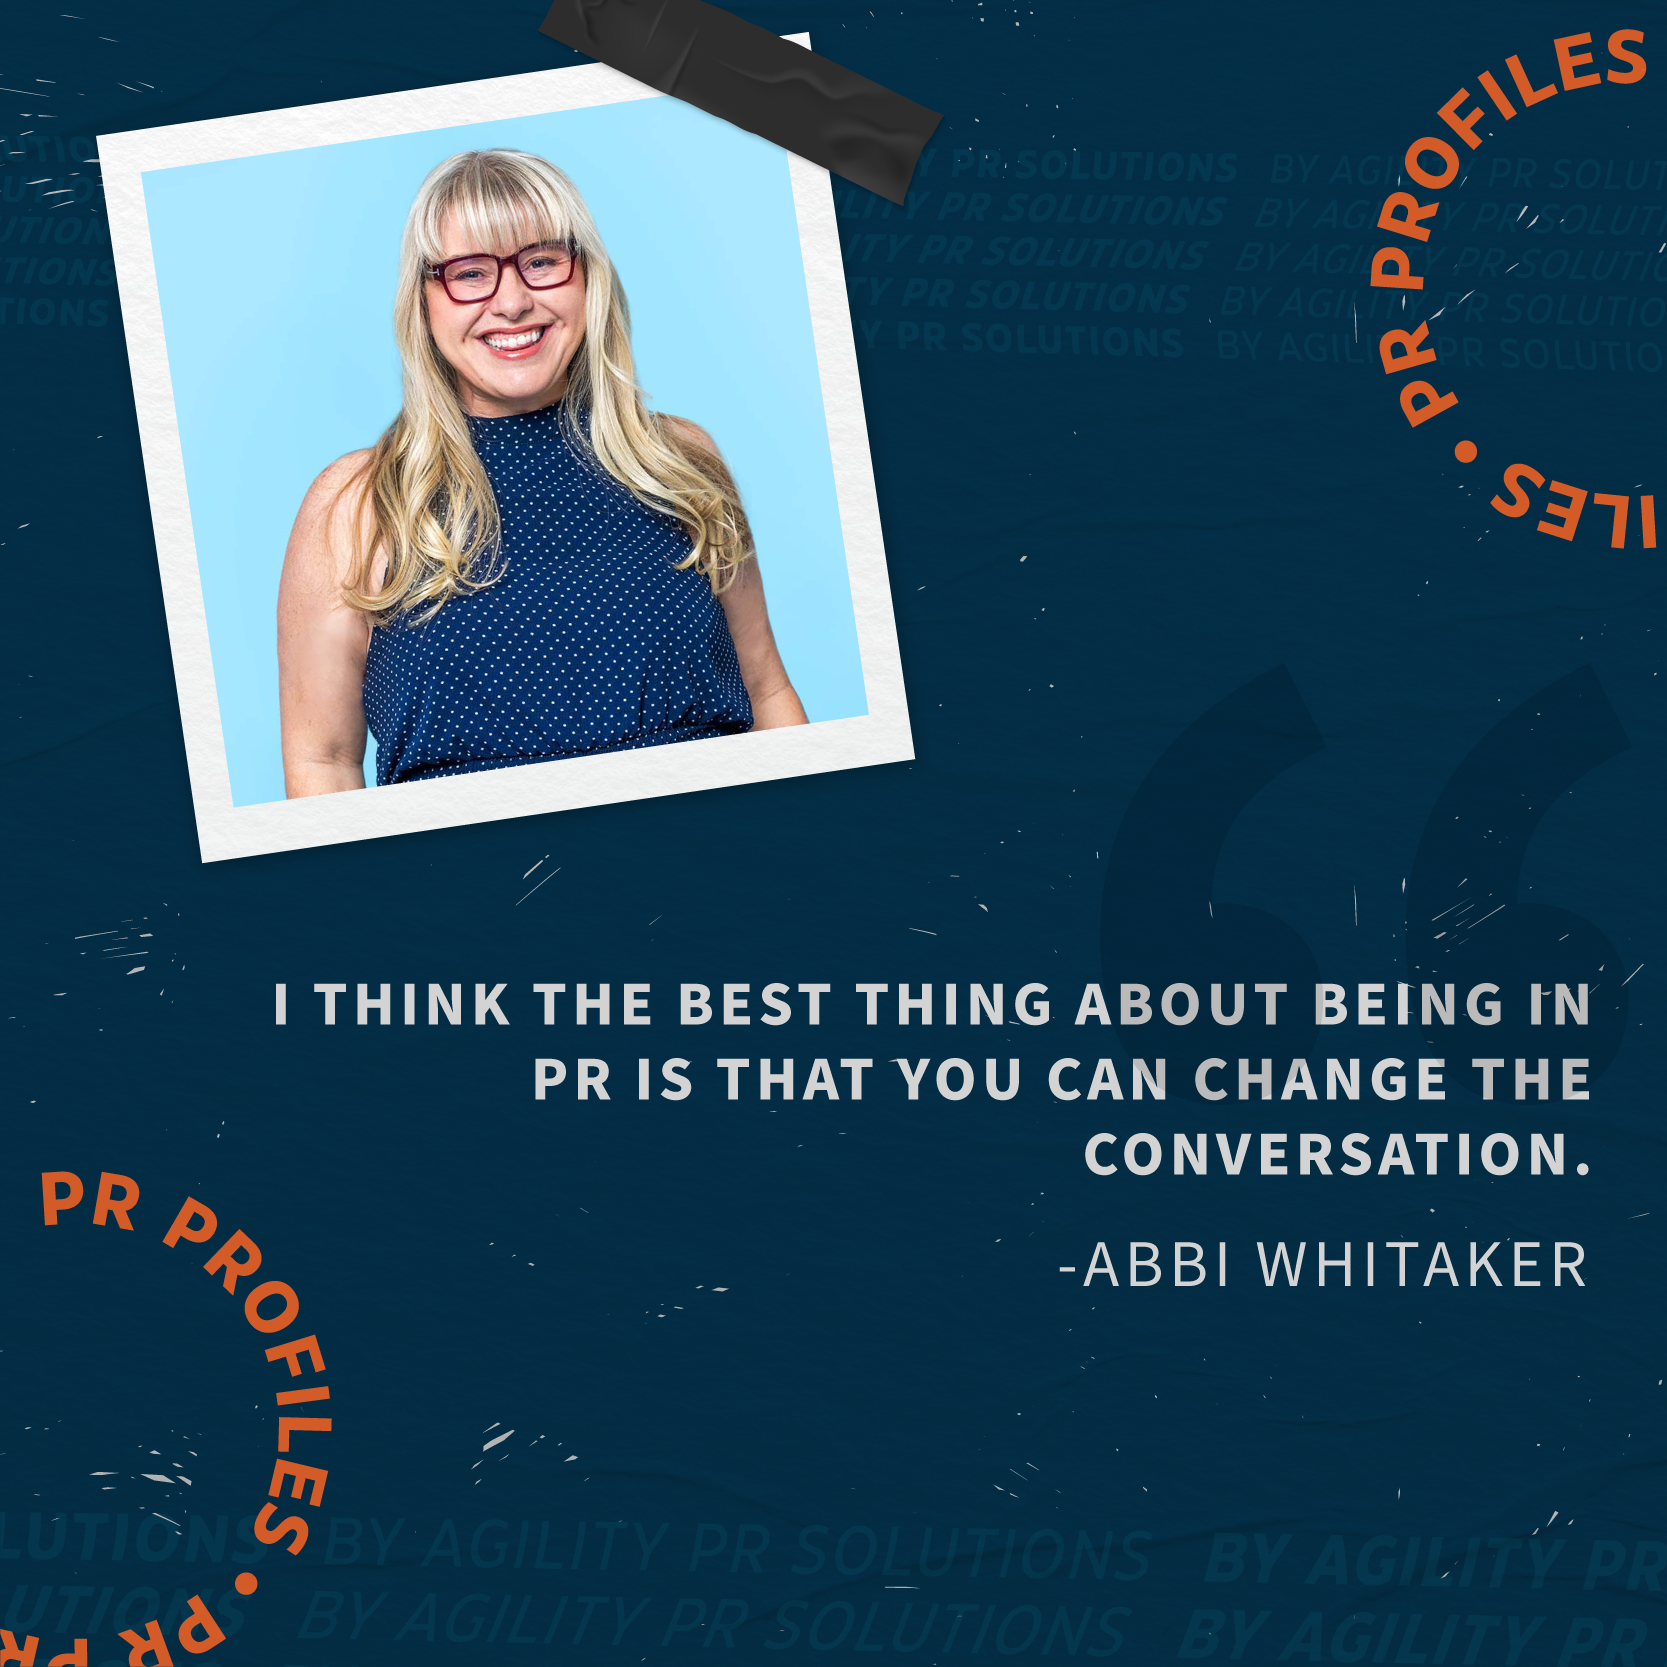 Abbi Whitaker, President and Co-Founder of The Abbi Agency. Below, the quote, "I think the best thing about being in PR is that you can change the conversation."